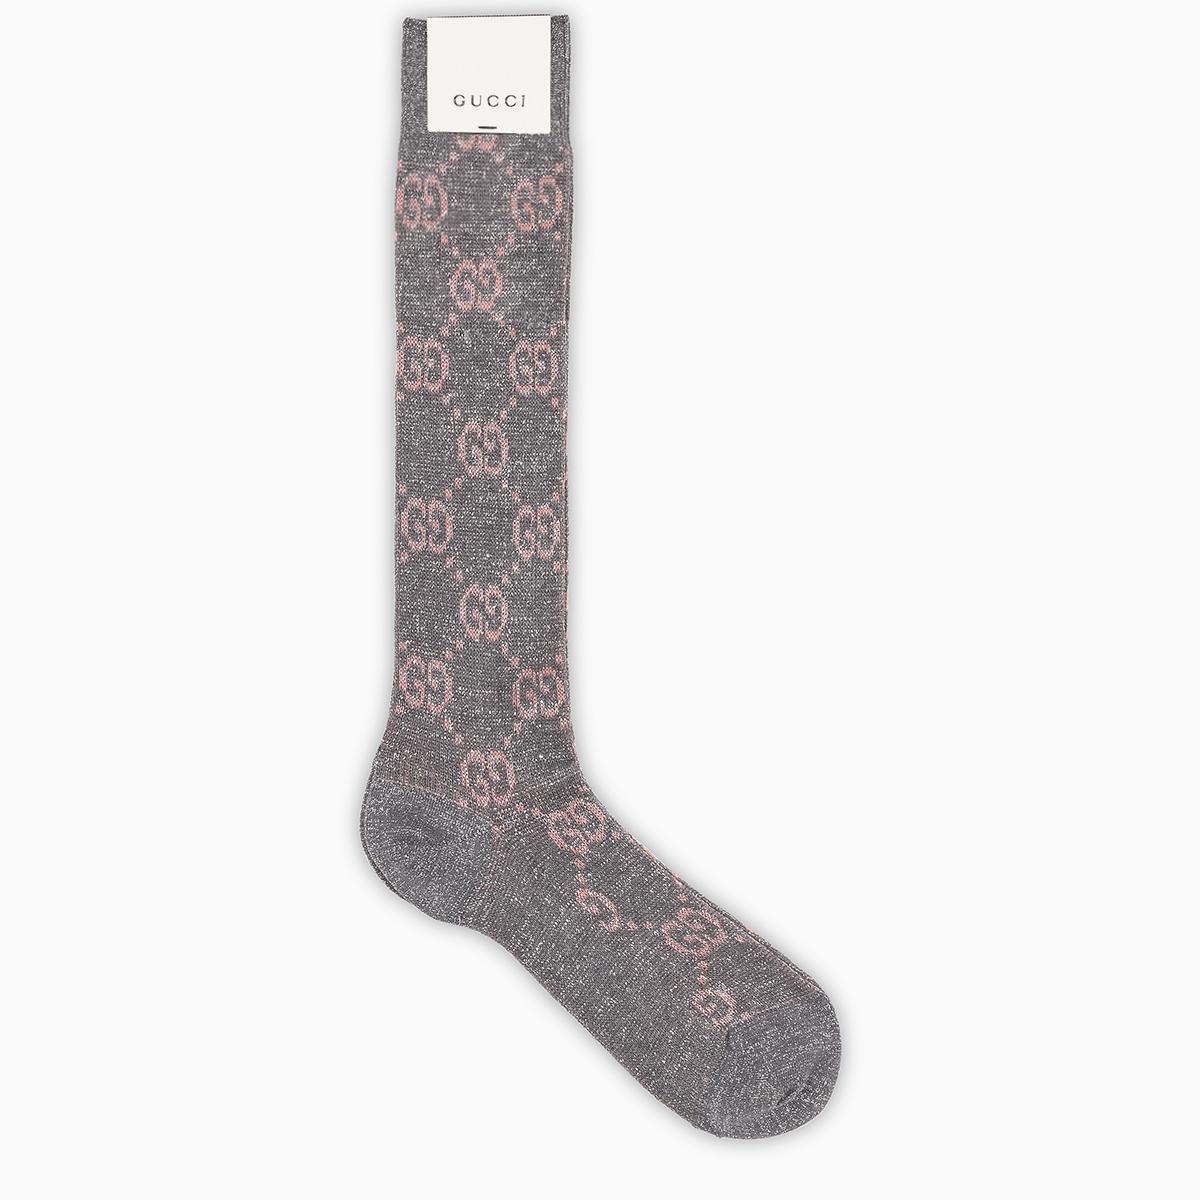 Gucci Grey And Pink Lamé GG Socks in Lead/Pink (Gray) - Lyst